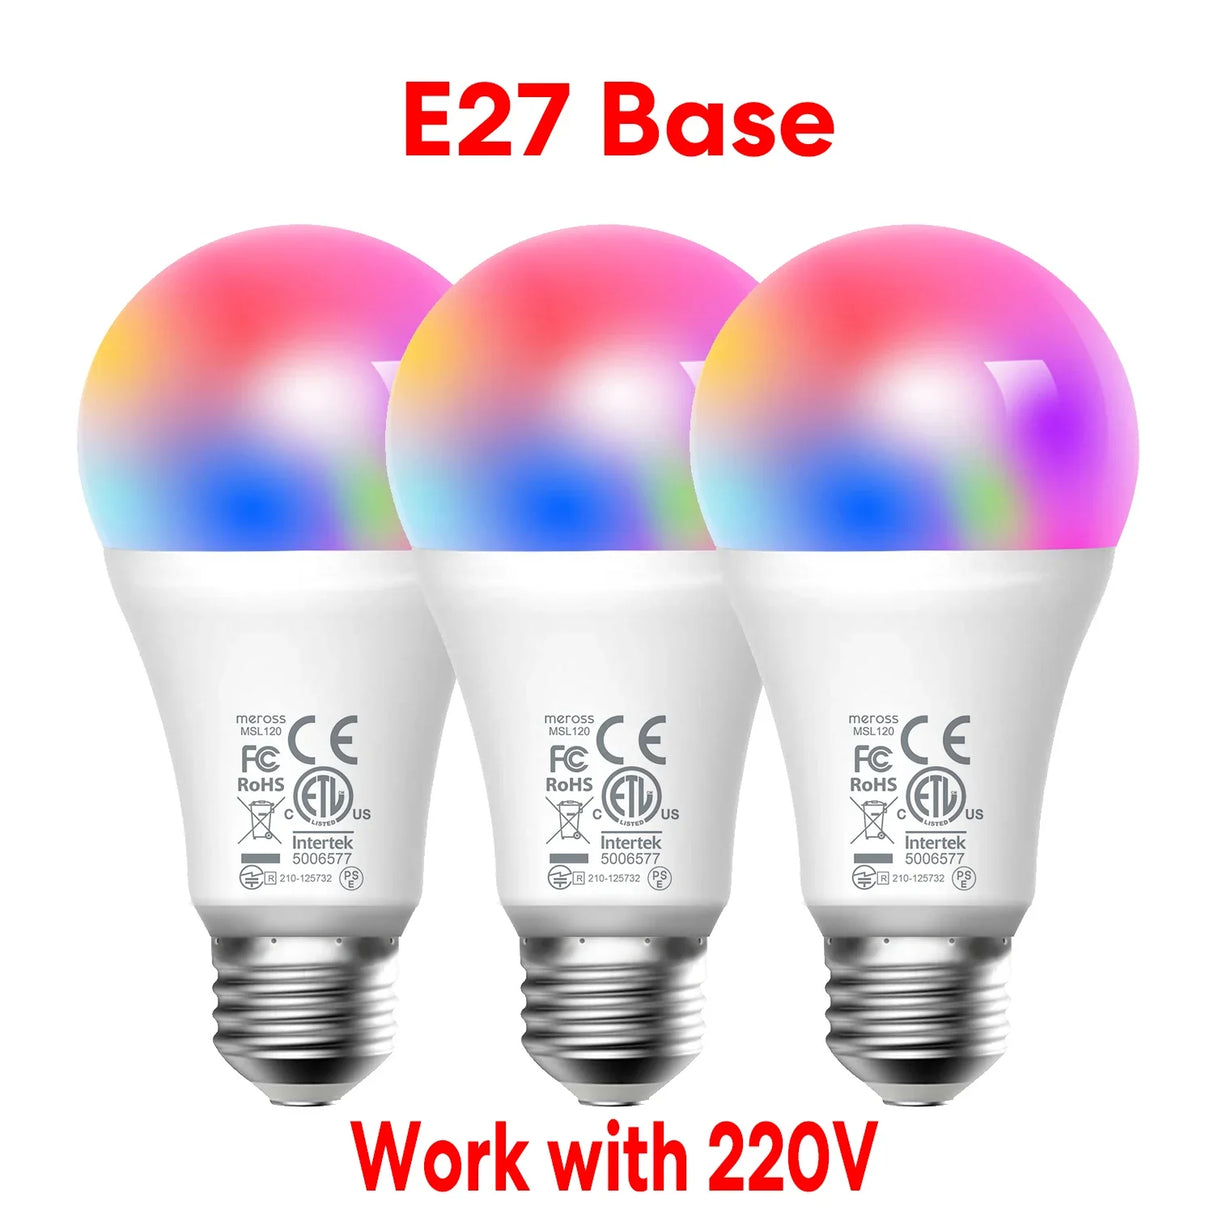 three different colored light bulbs with the words e27 base